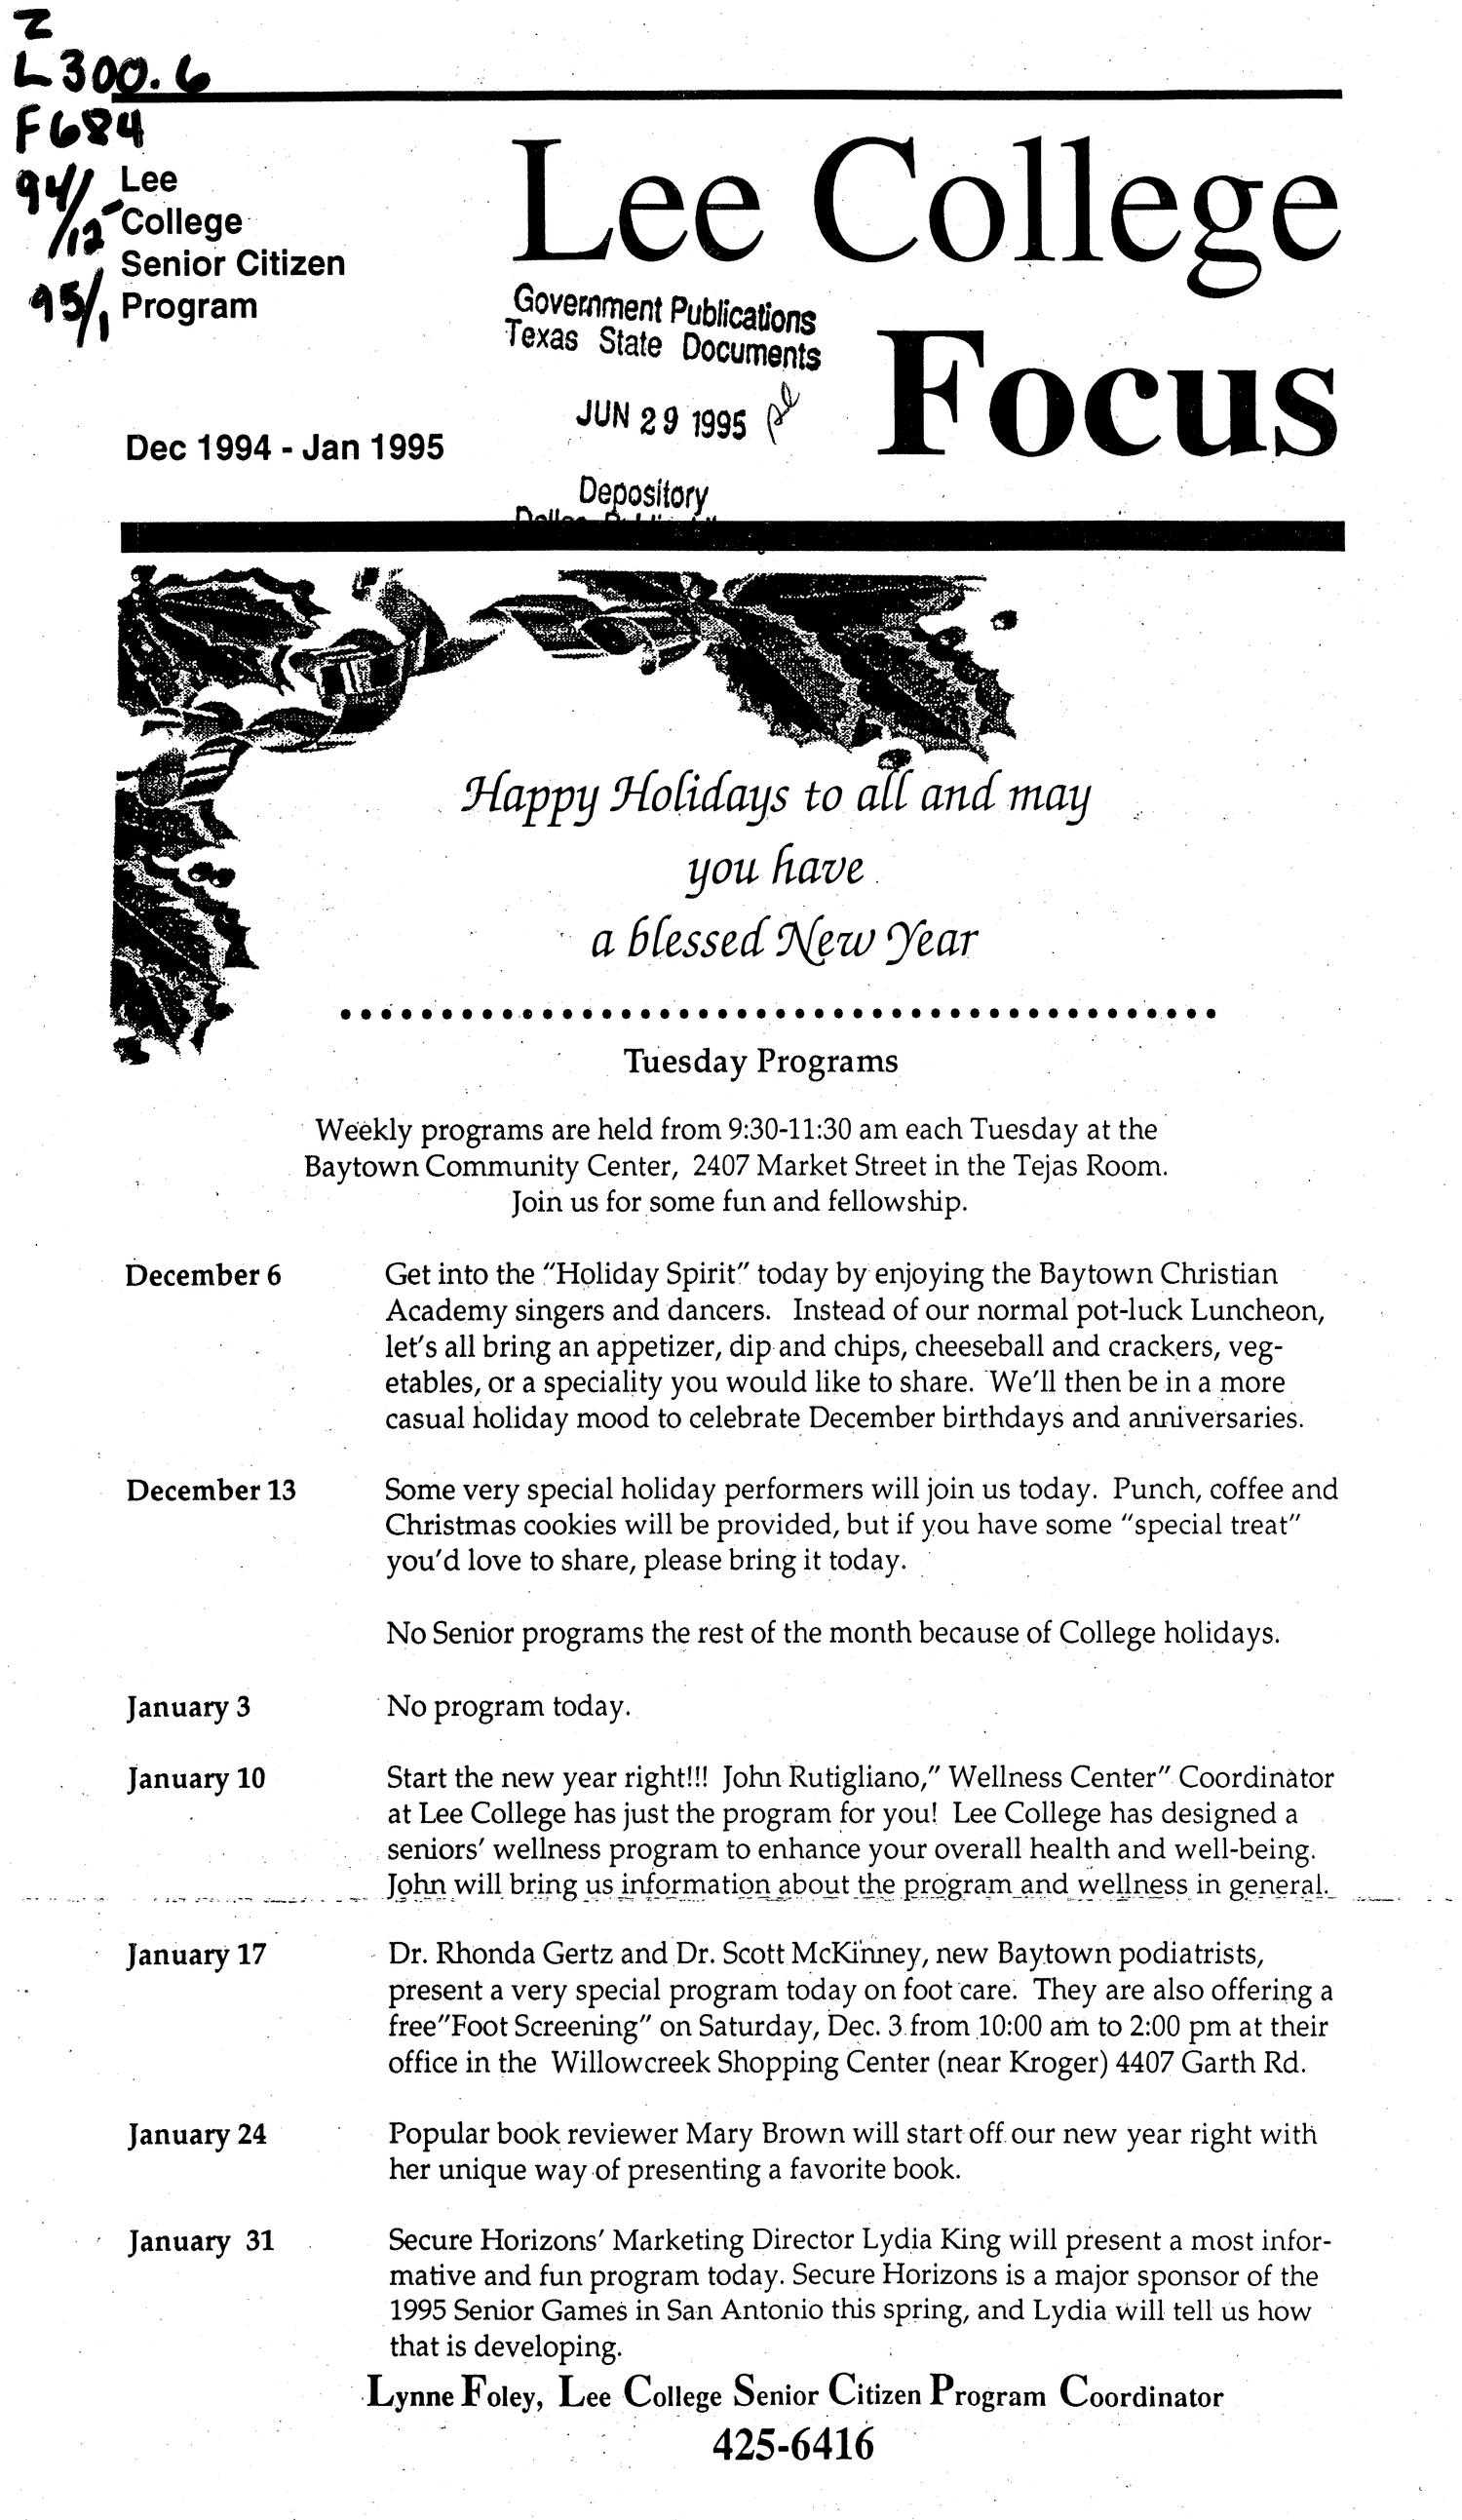 Lee College Focus, December 1994 - January 1995
                                                
                                                    FRONT COVER
                                                